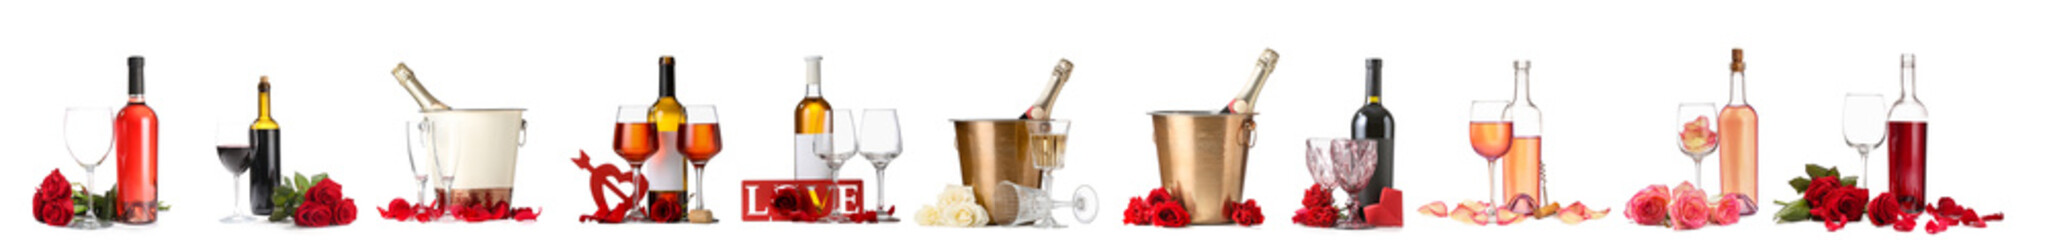 Obraz na płótnie Canvas Bottles of wine and champagne with rose flowers on white background